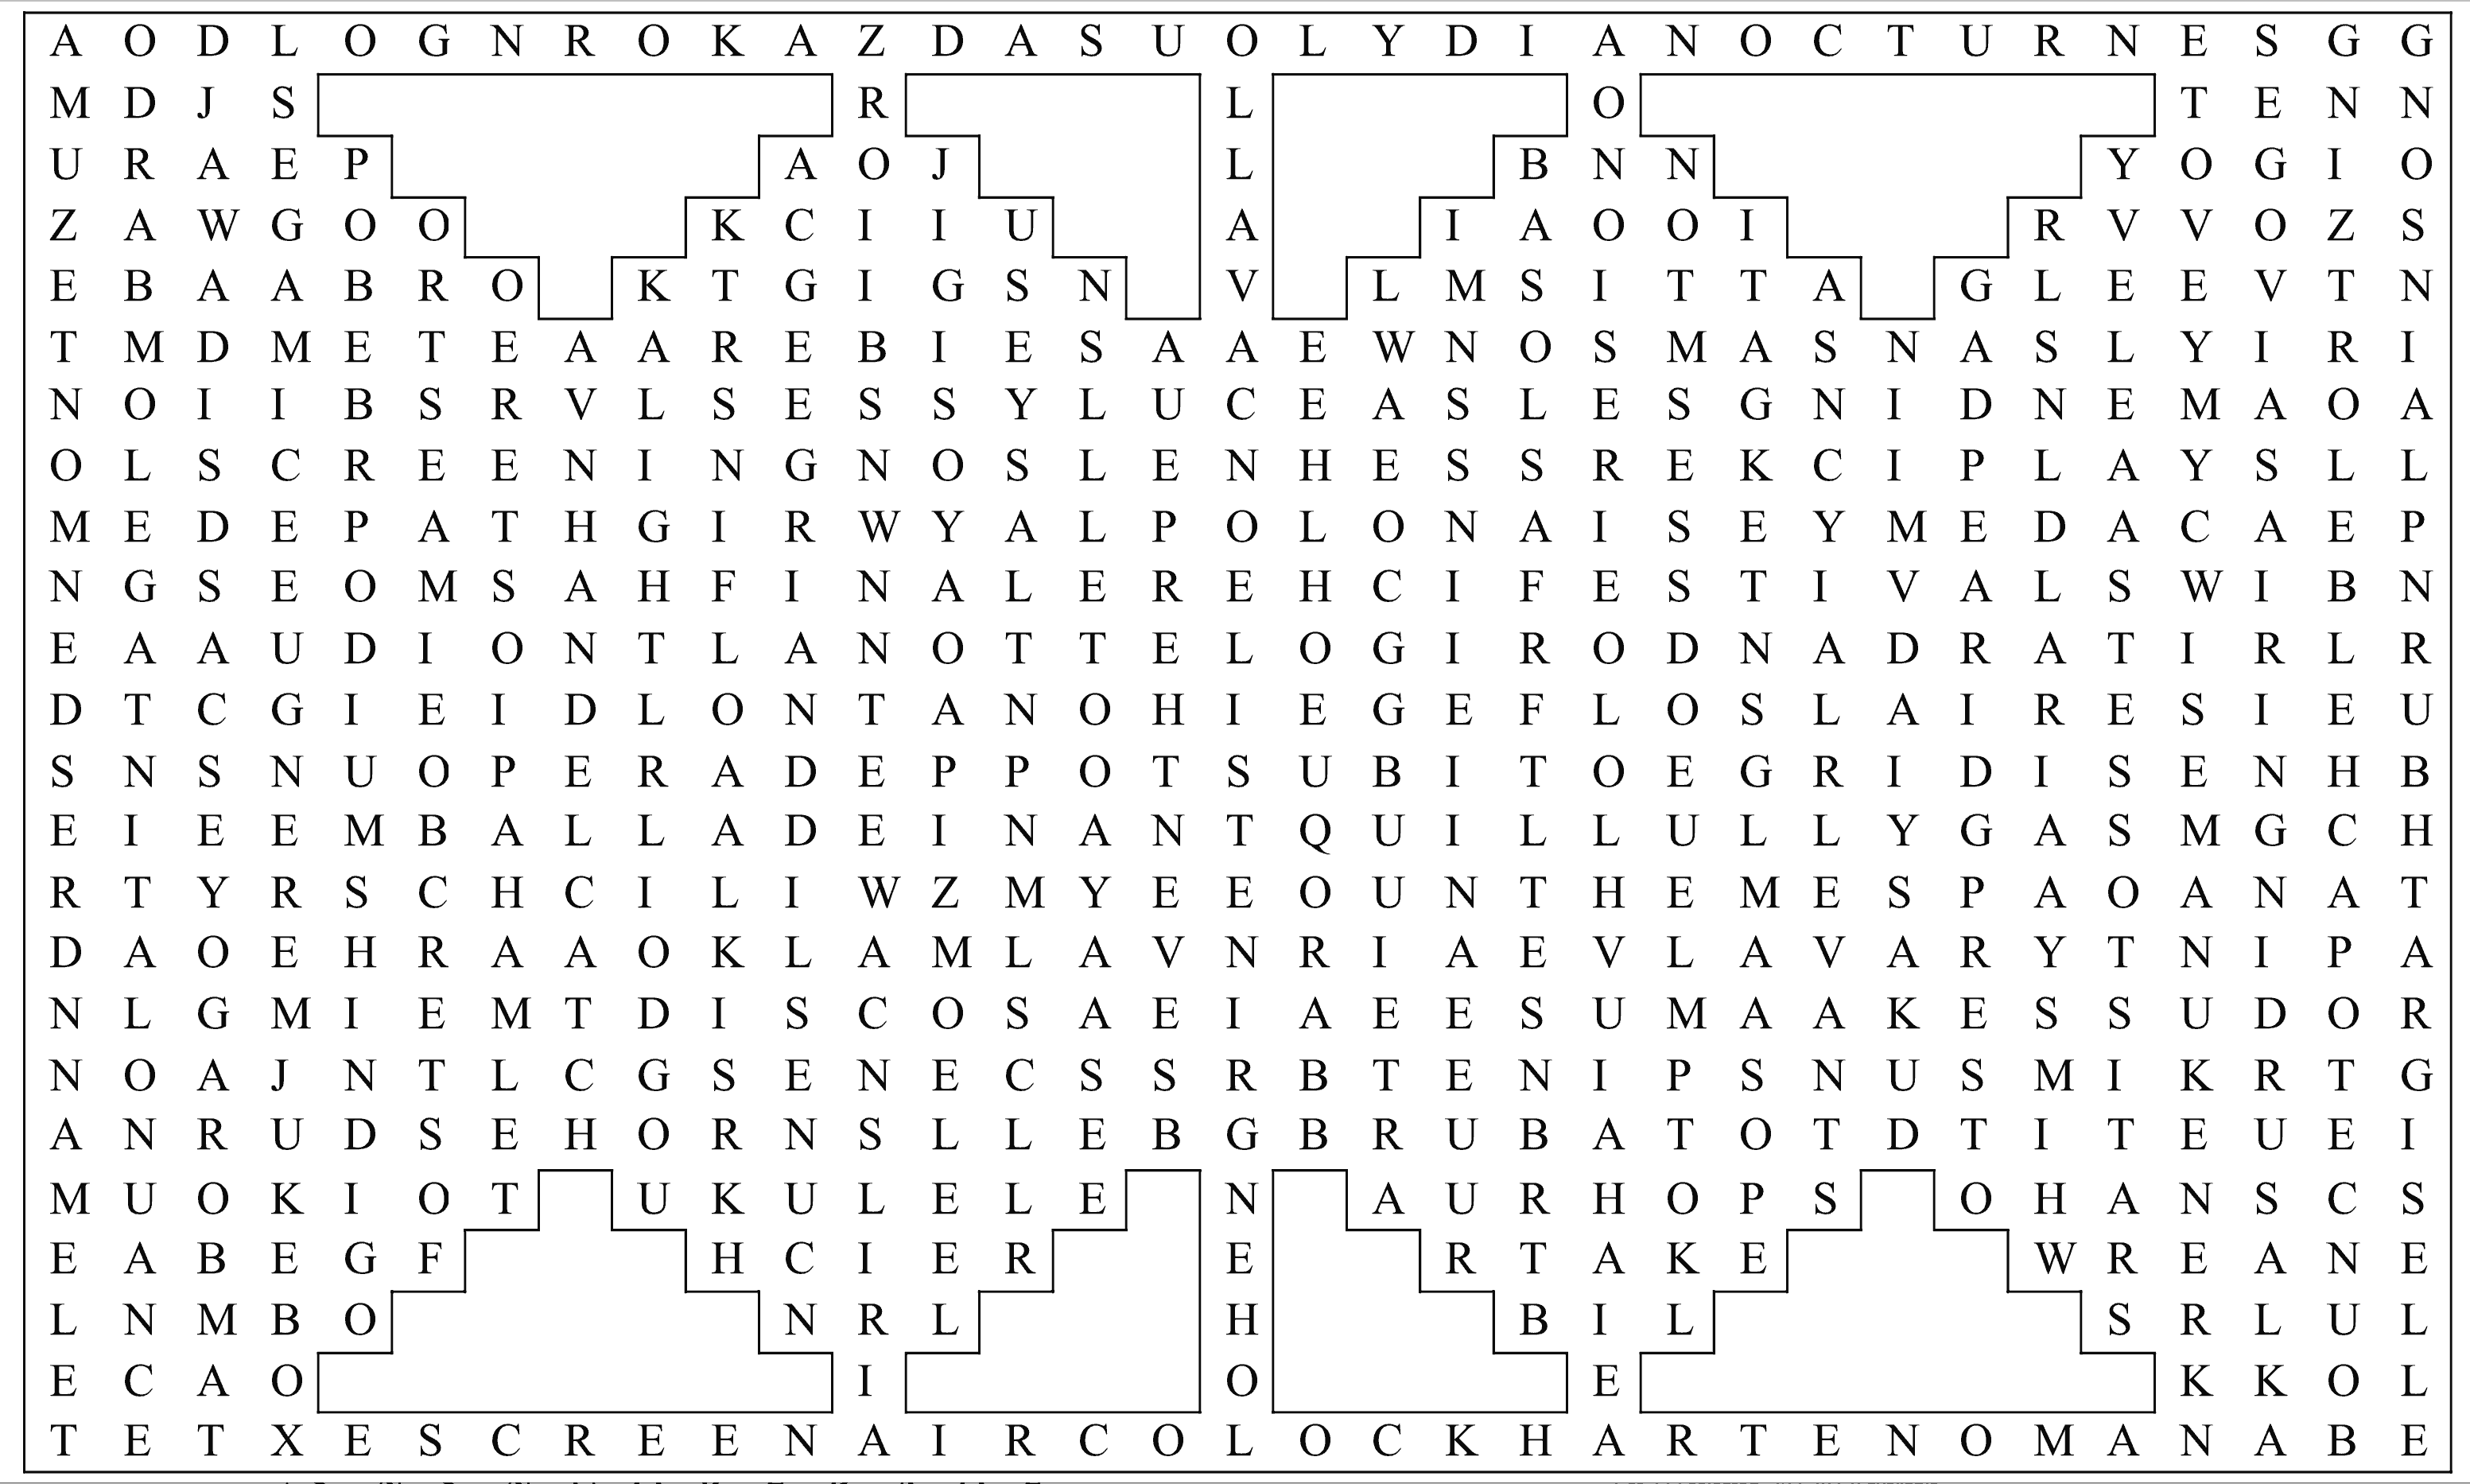 Locrian word puzzle by Allan Rae